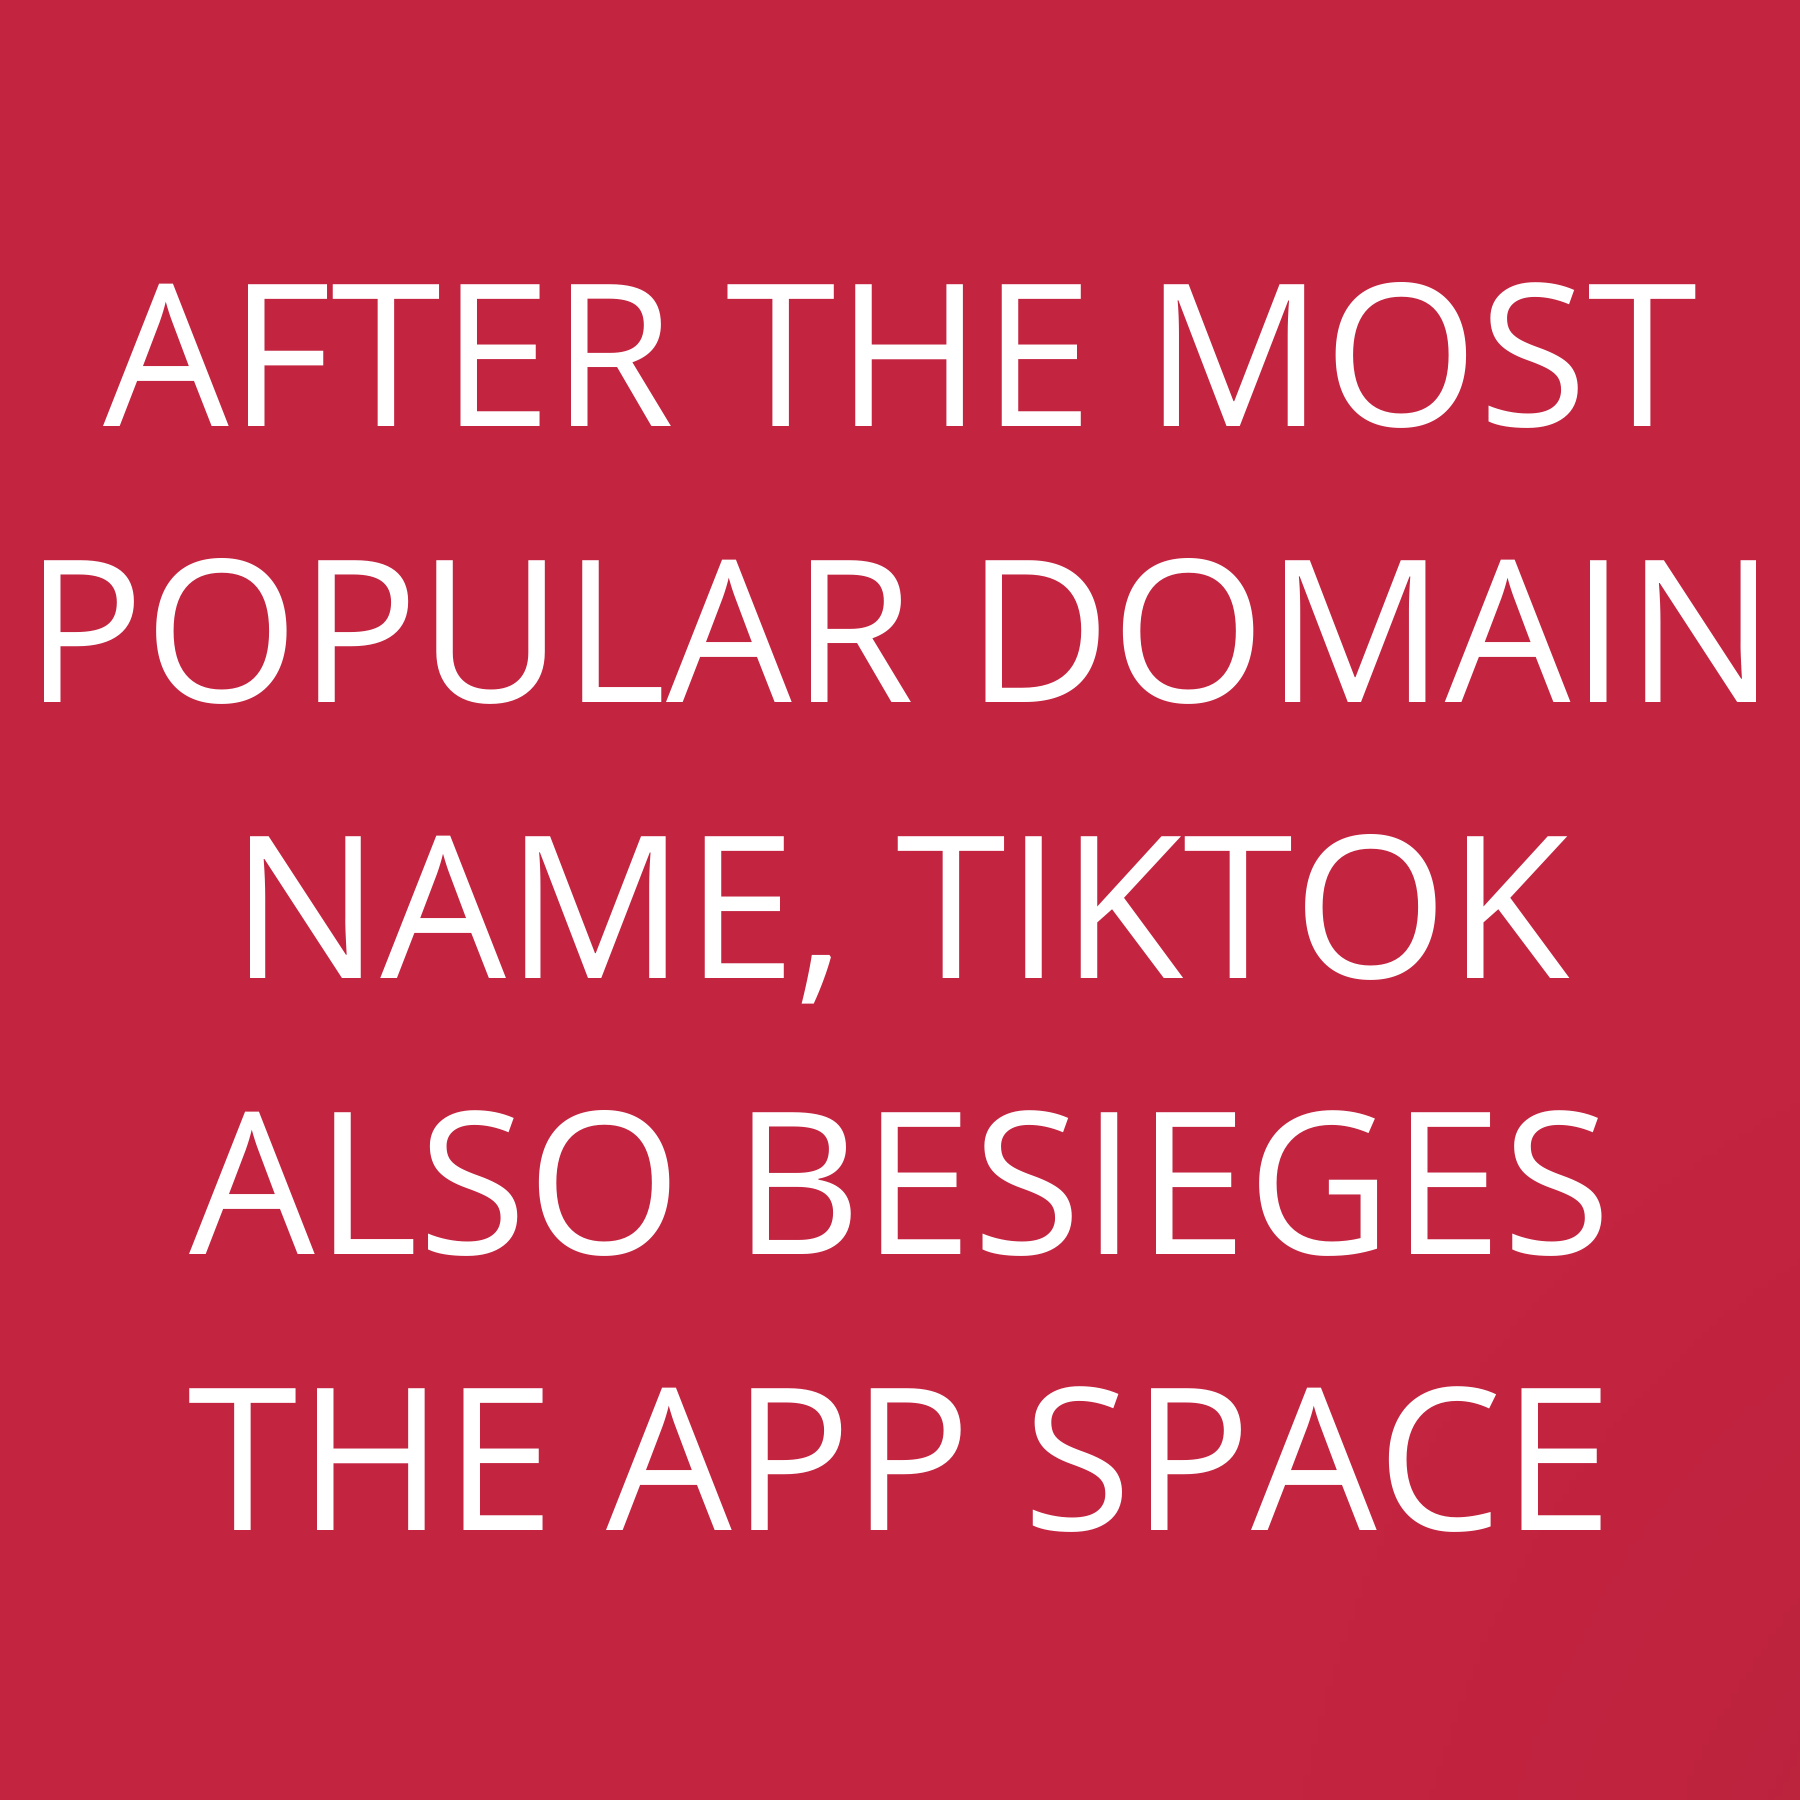 After the most popular domain name, TikTok also besieges the app space